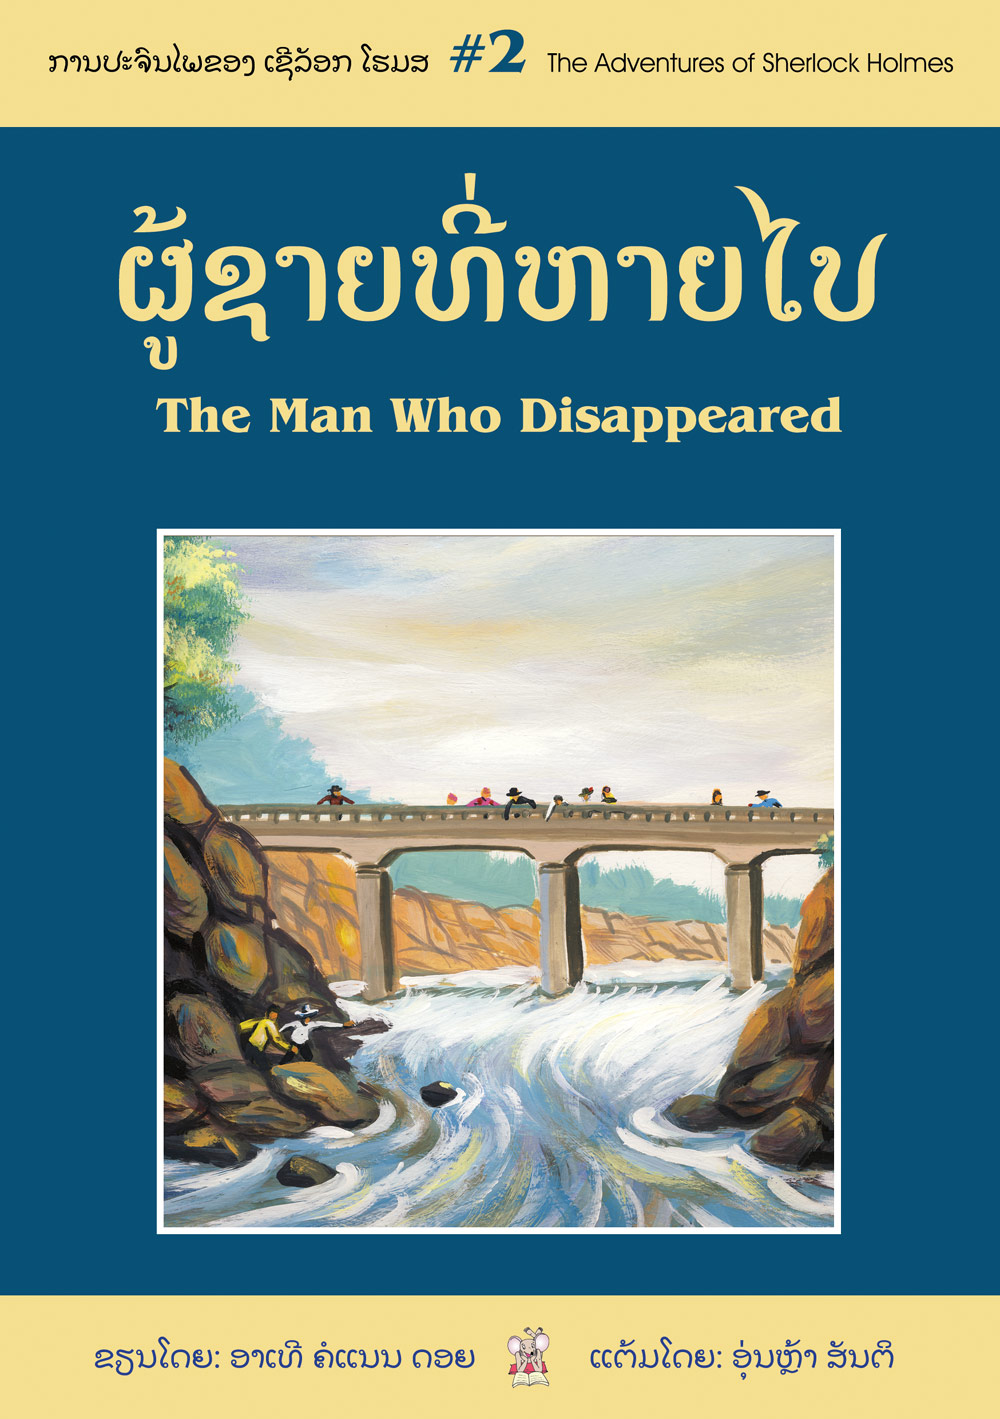 The Man Who Disappeared large book cover, published in Lao and English